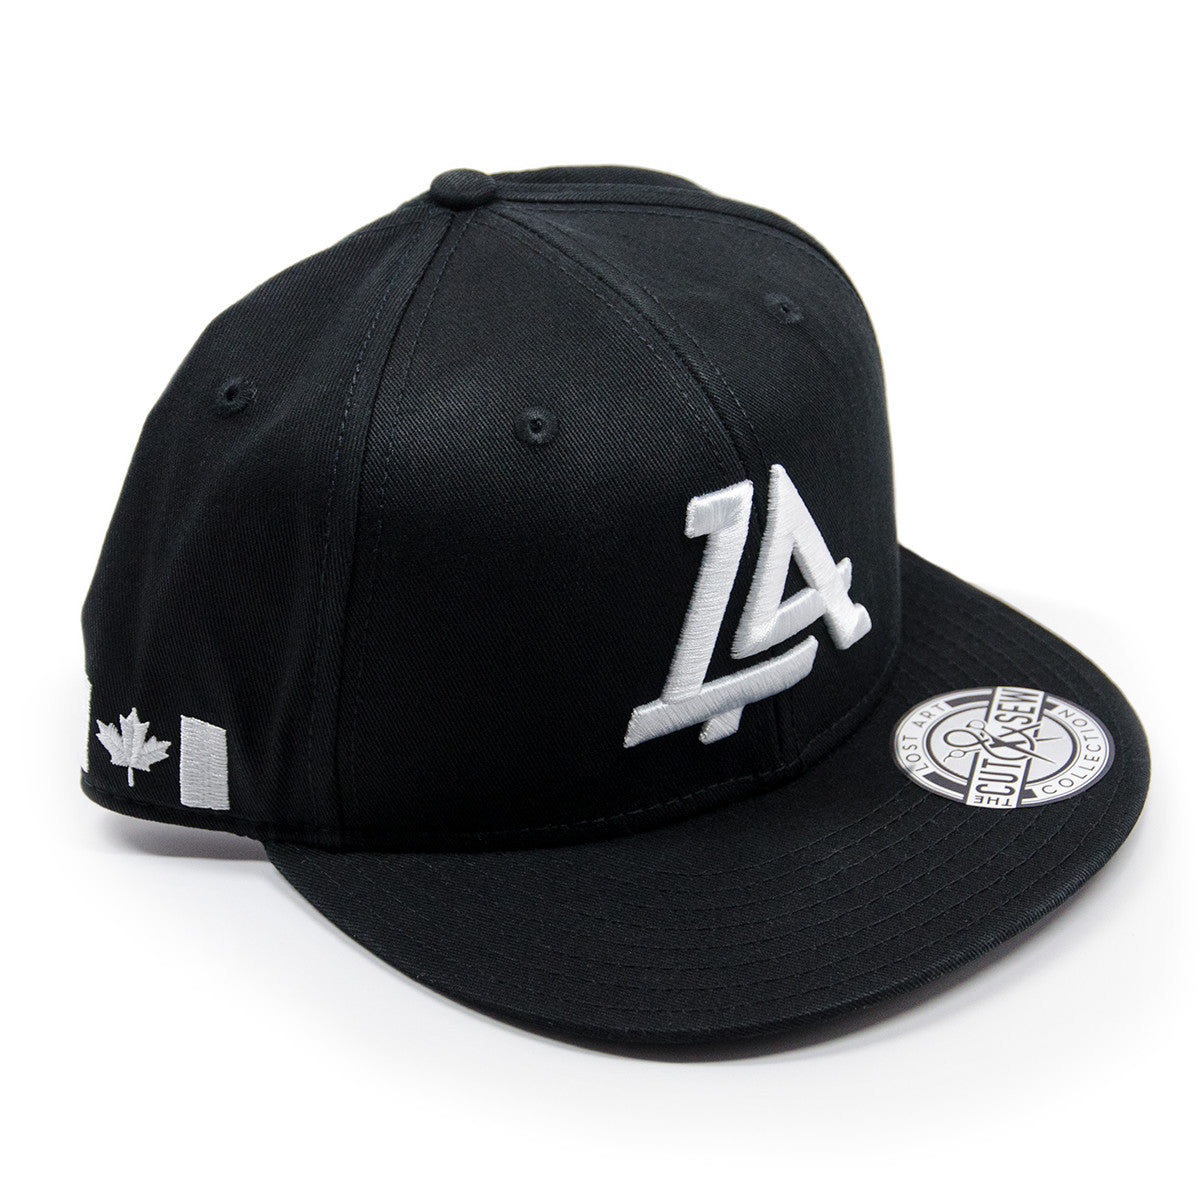 Lost Art Canada - white logo black snapback hat front view